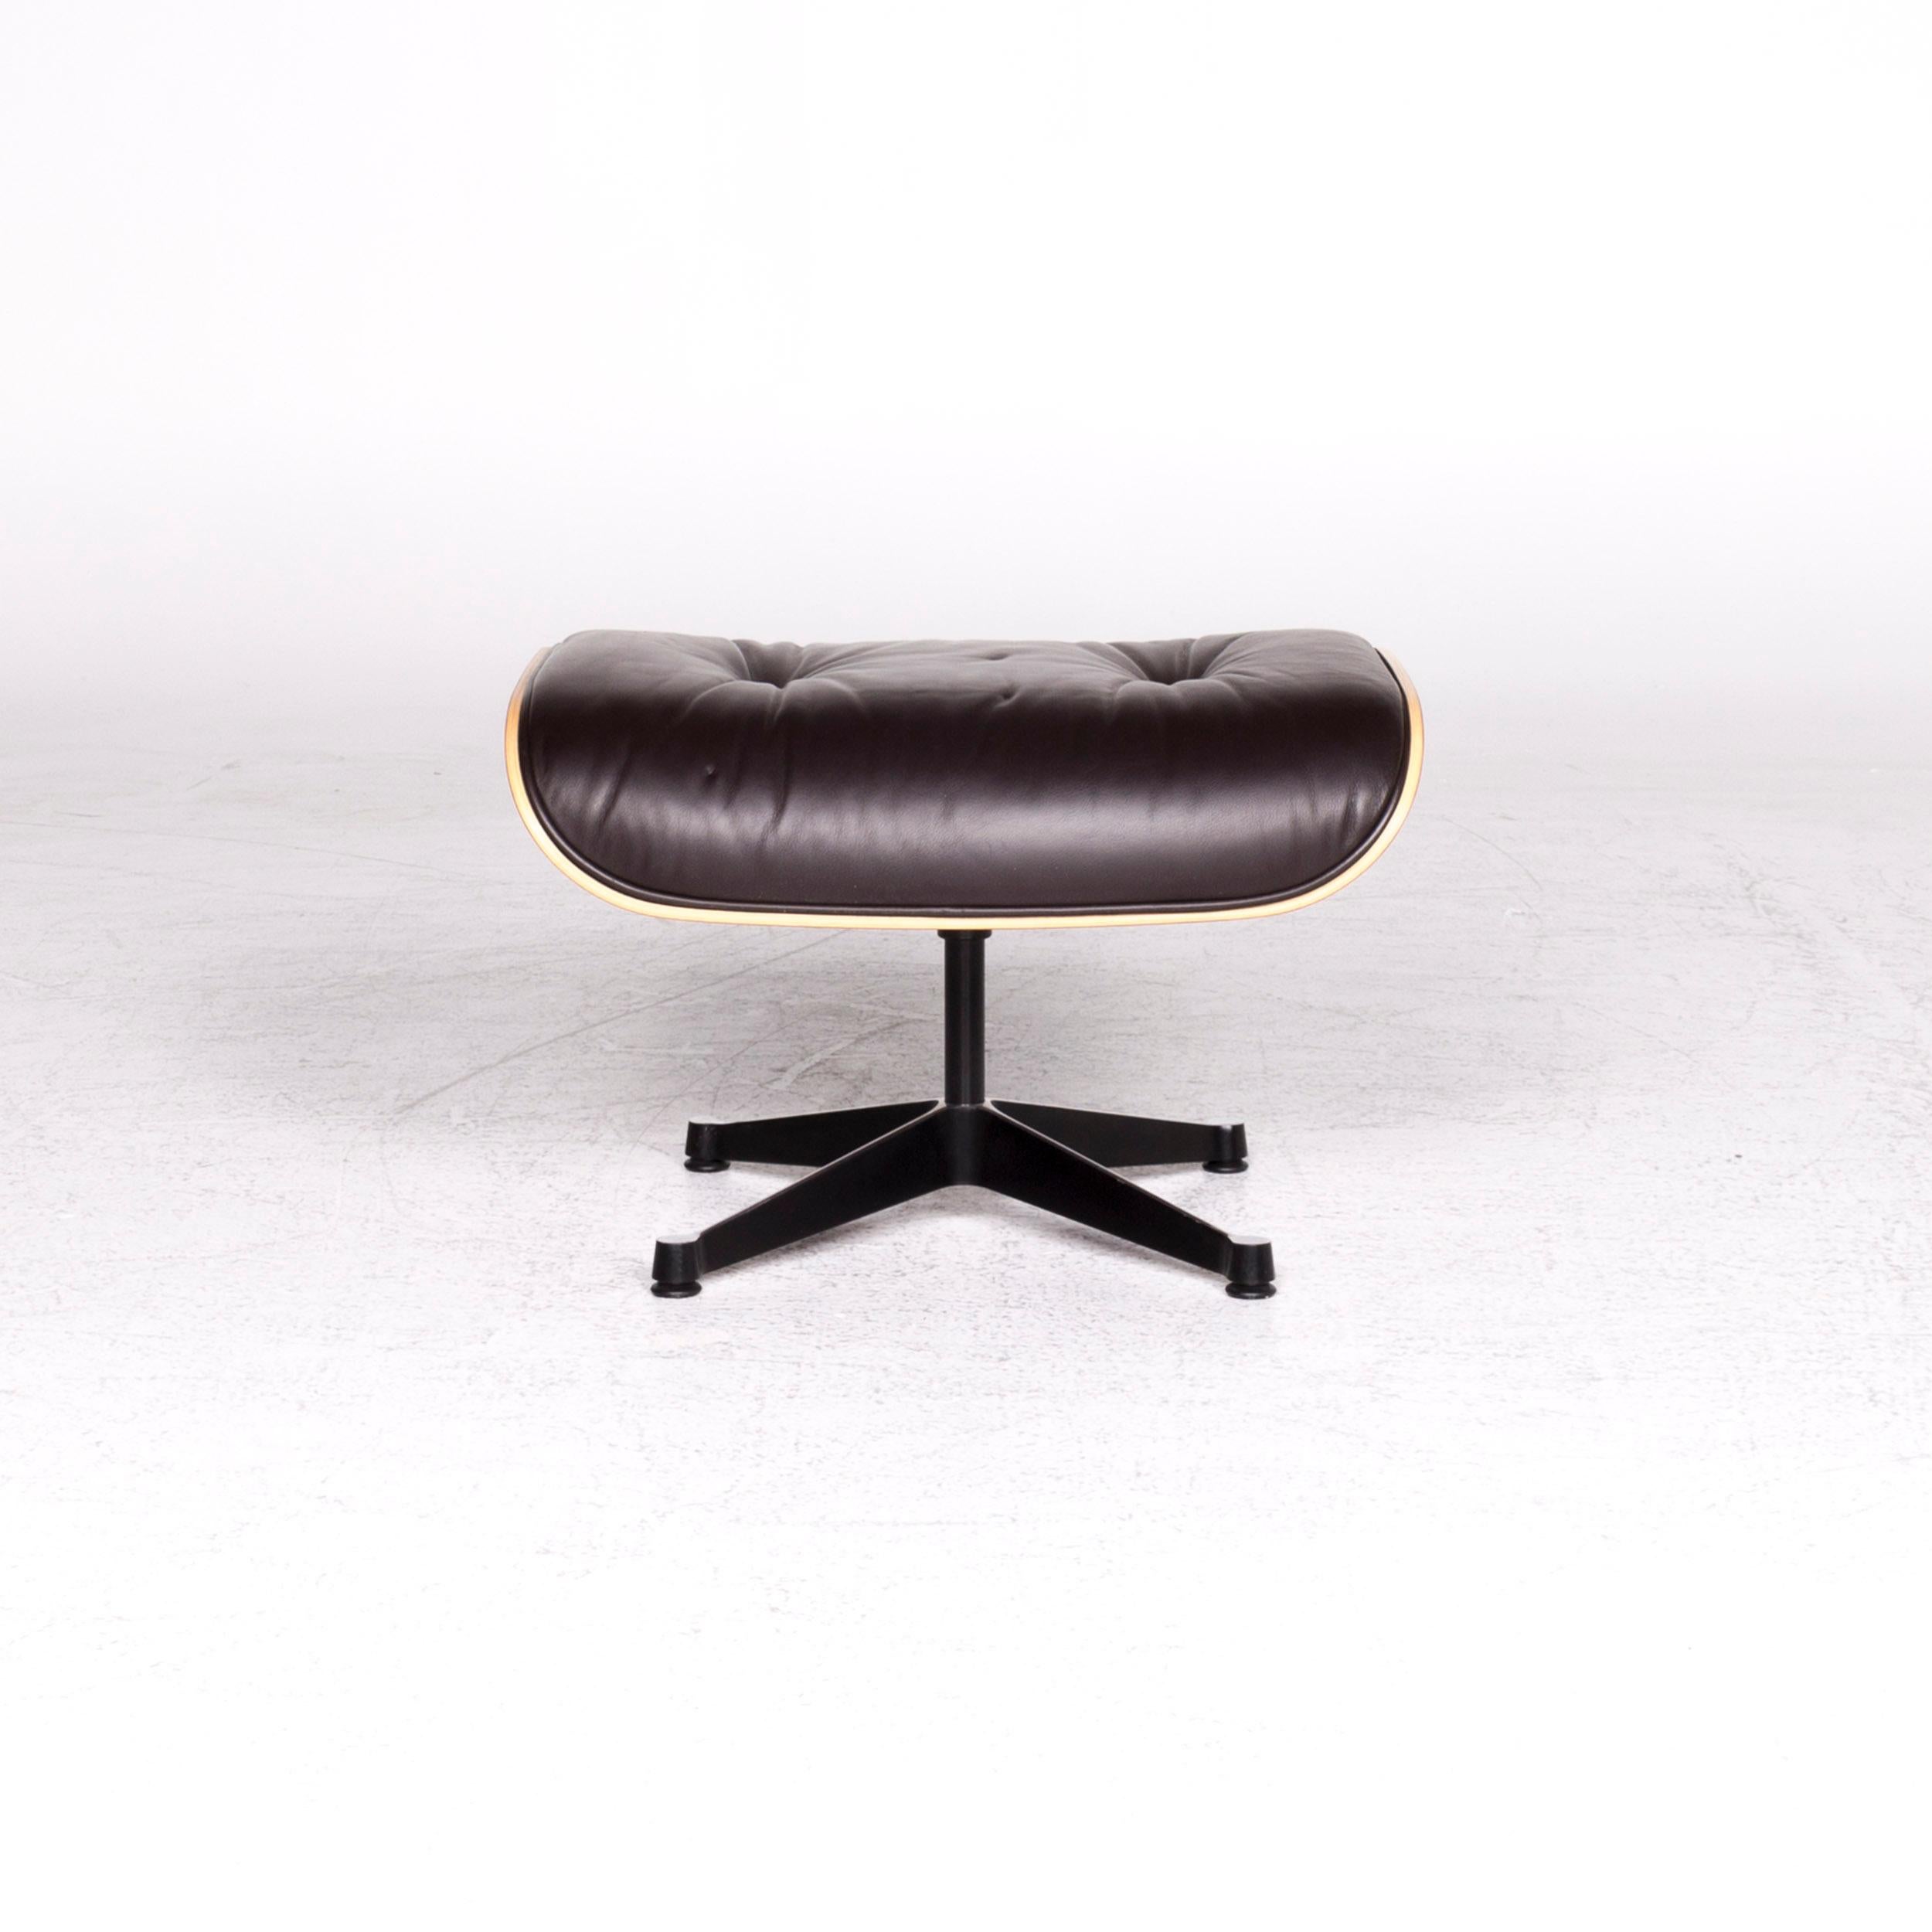 Vitra Eames Lounge Chair Leather Stool Brown Charles & Ray Eames Chair im Angebot 4